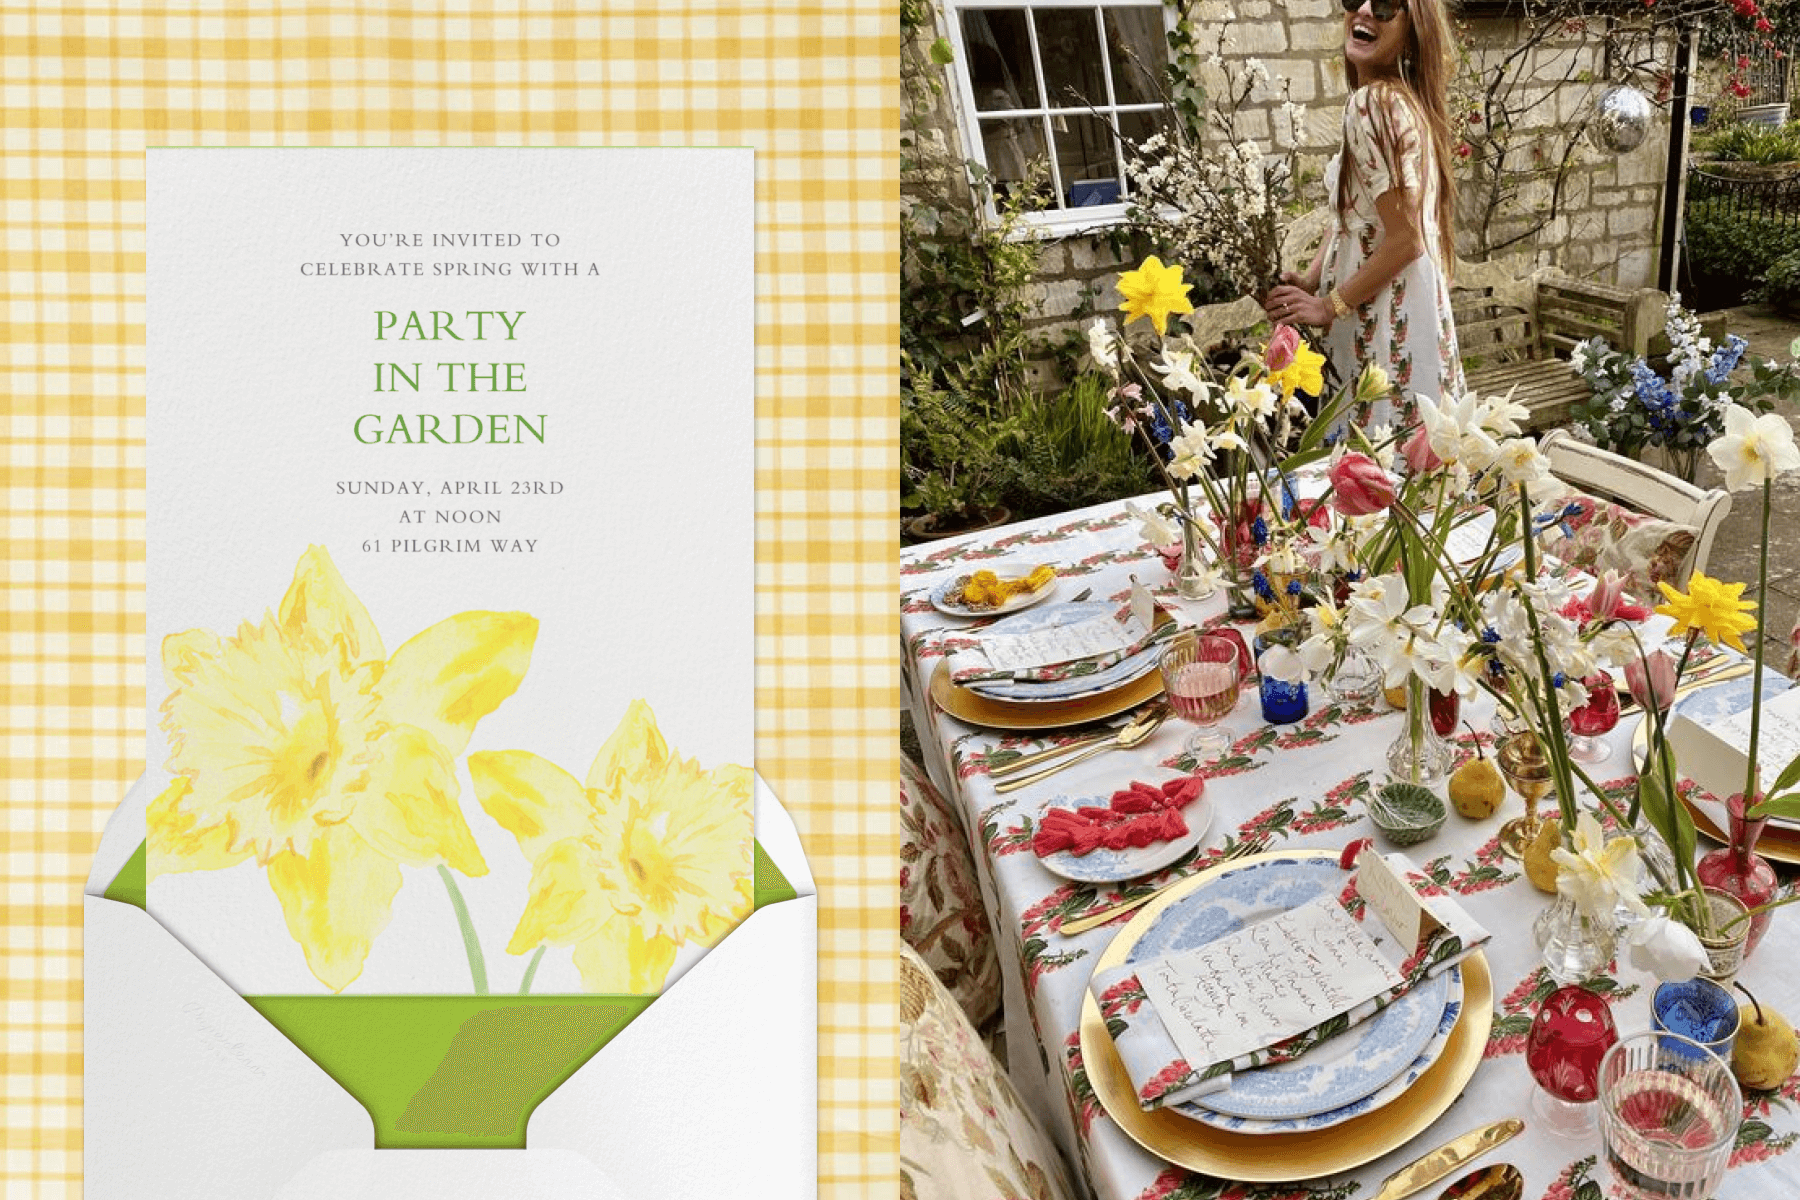 An invitation with large daffodils and an envelope with green liner; am outdoor table set with fruit, daffodils, and tulips